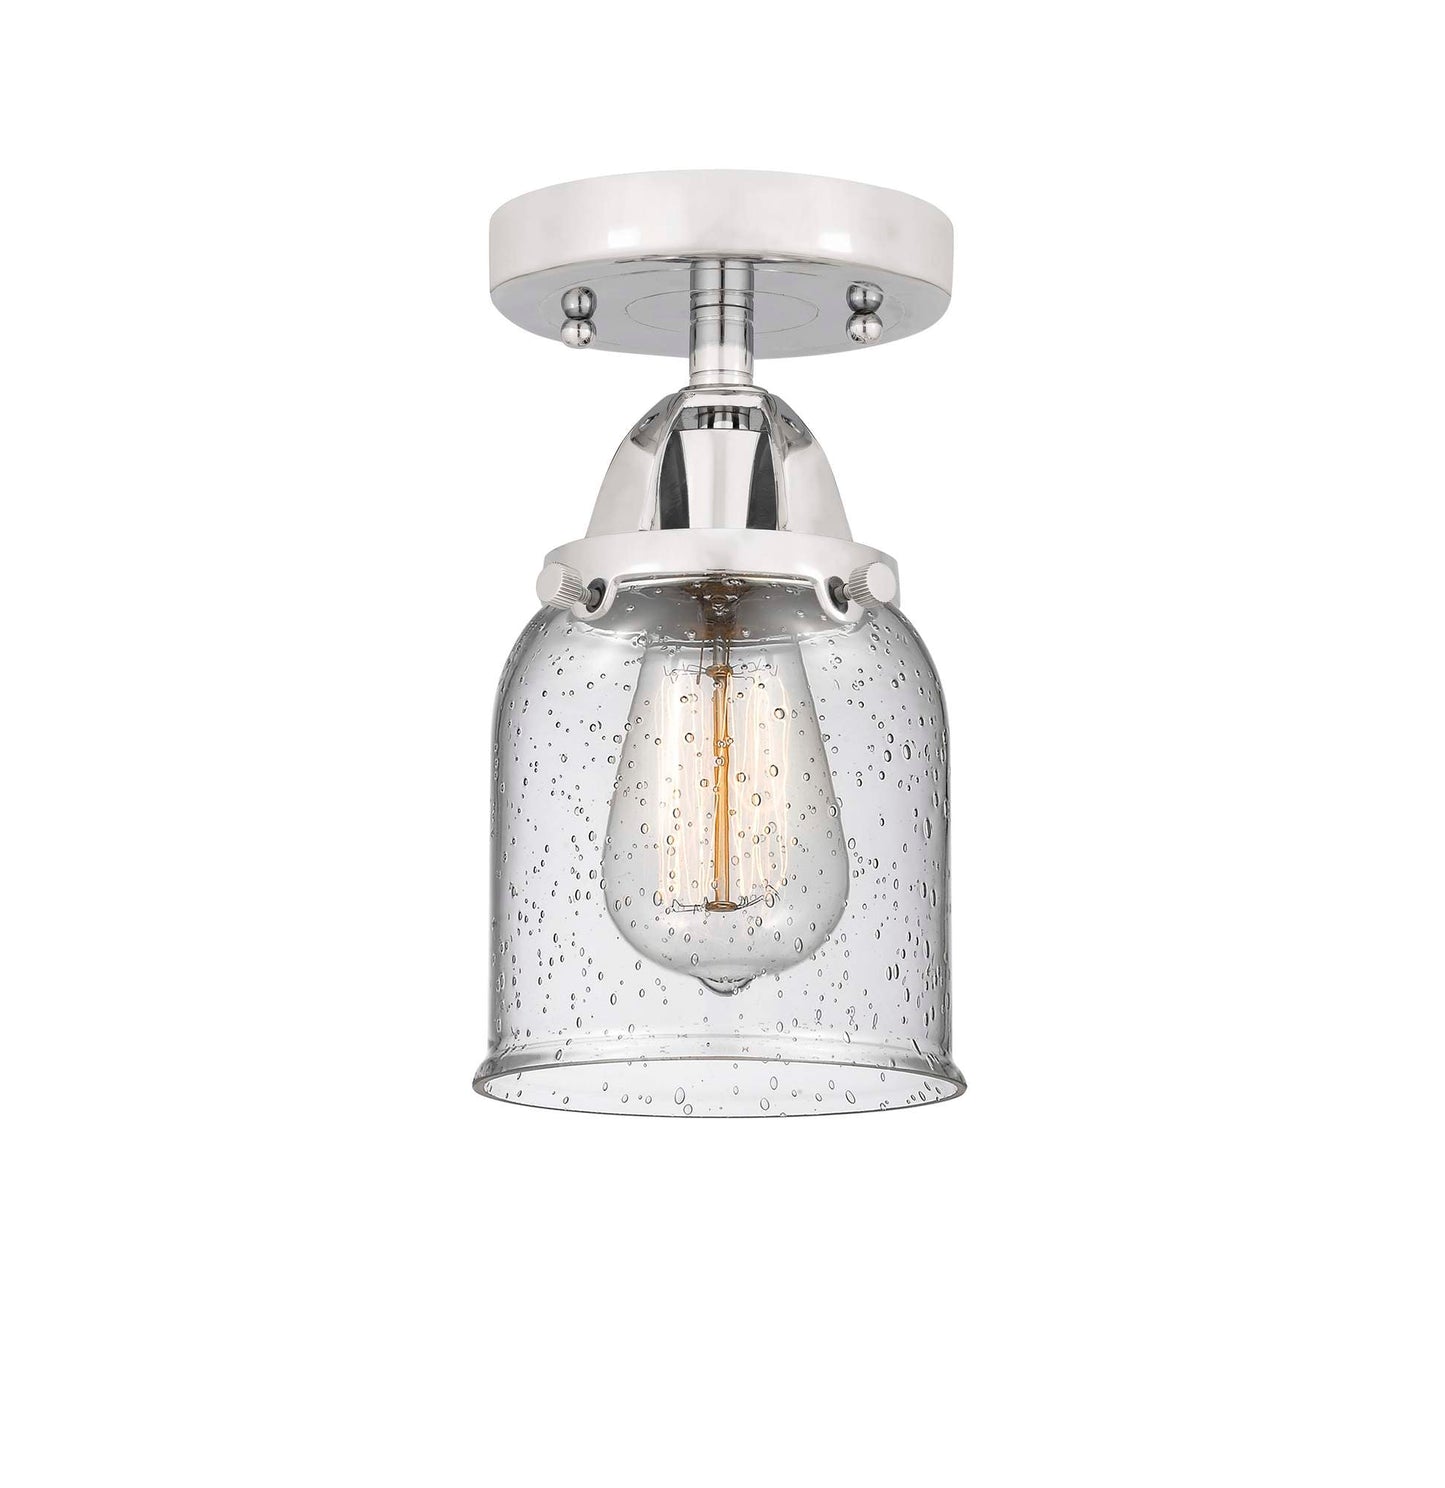 288-1C-PC-G54 1-Light 5" Polished Chrome Semi-Flush Mount - Seedy Small Bell Glass - LED Bulb - Dimmensions: 5 x 5 x 9.25 - Sloped Ceiling Compatible: No